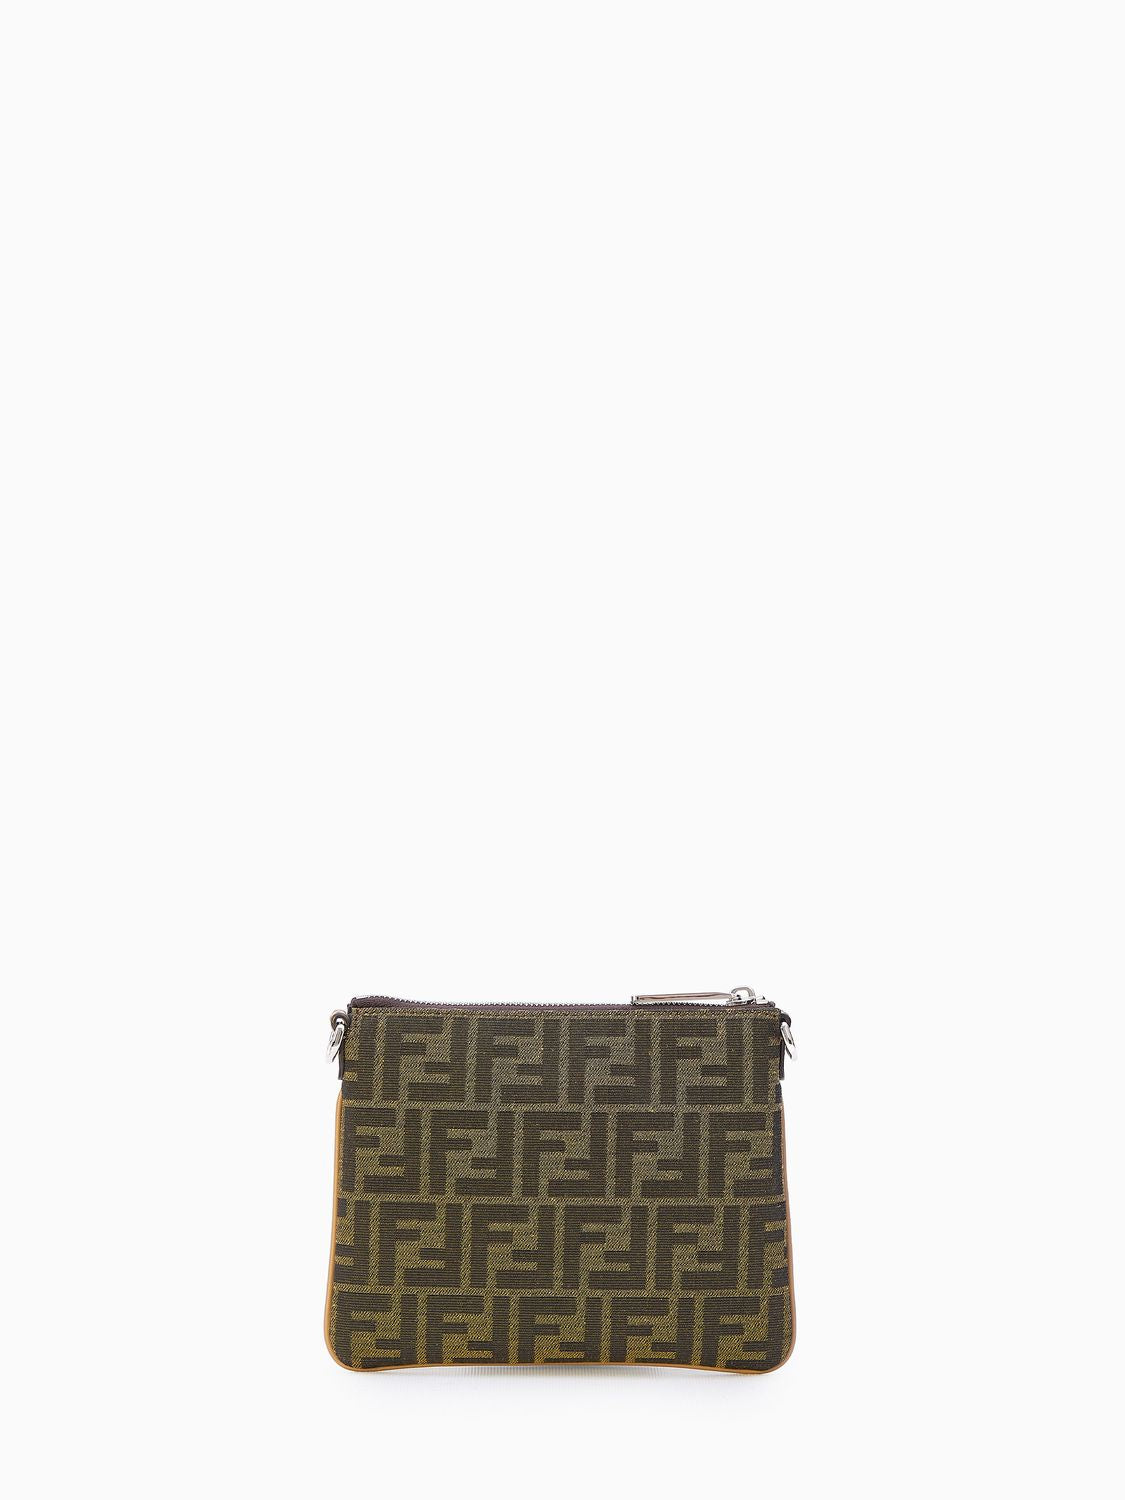 FENDI Mini Jacquard Crossbody Clutch in Tan with Beige Leather Accents, Adjustable Strap, and Zip Closure - 20.5x1 cm